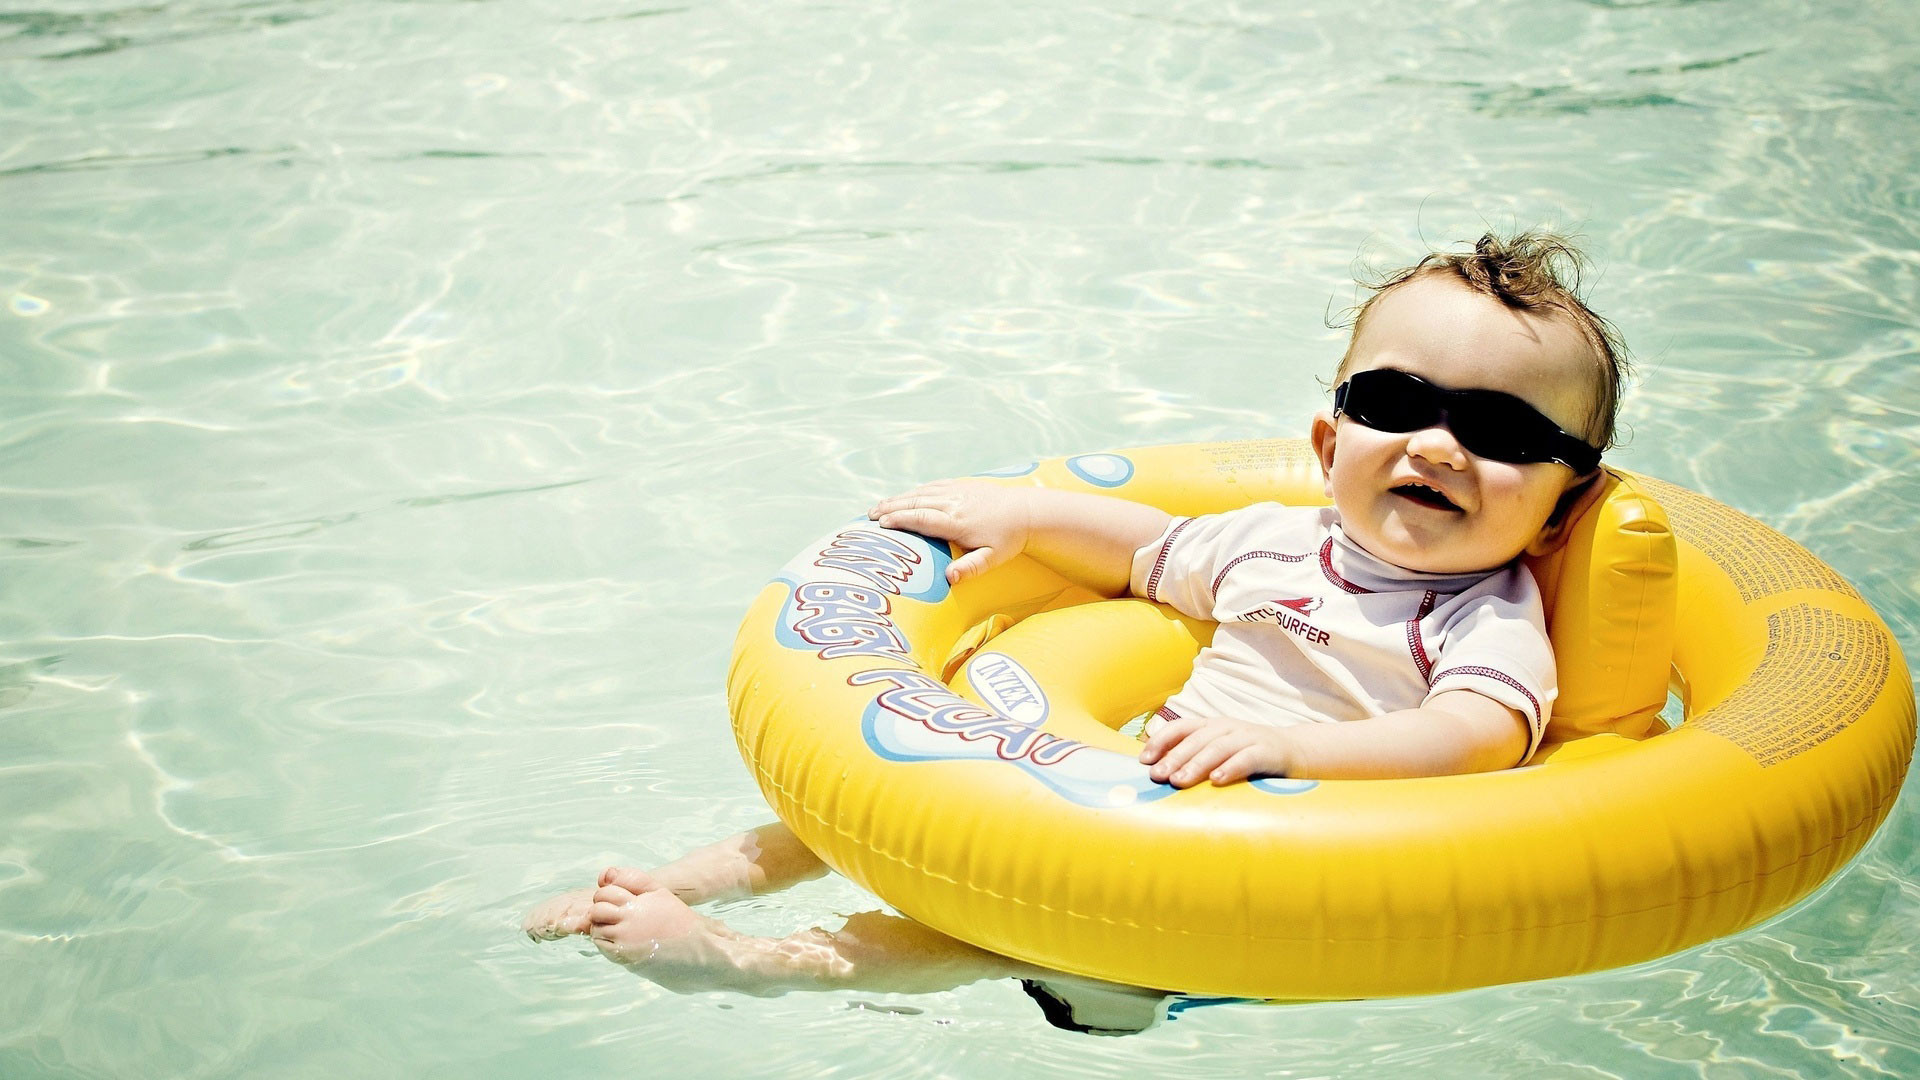 1920x1080 funny babe boy in swimming pool wallpaper